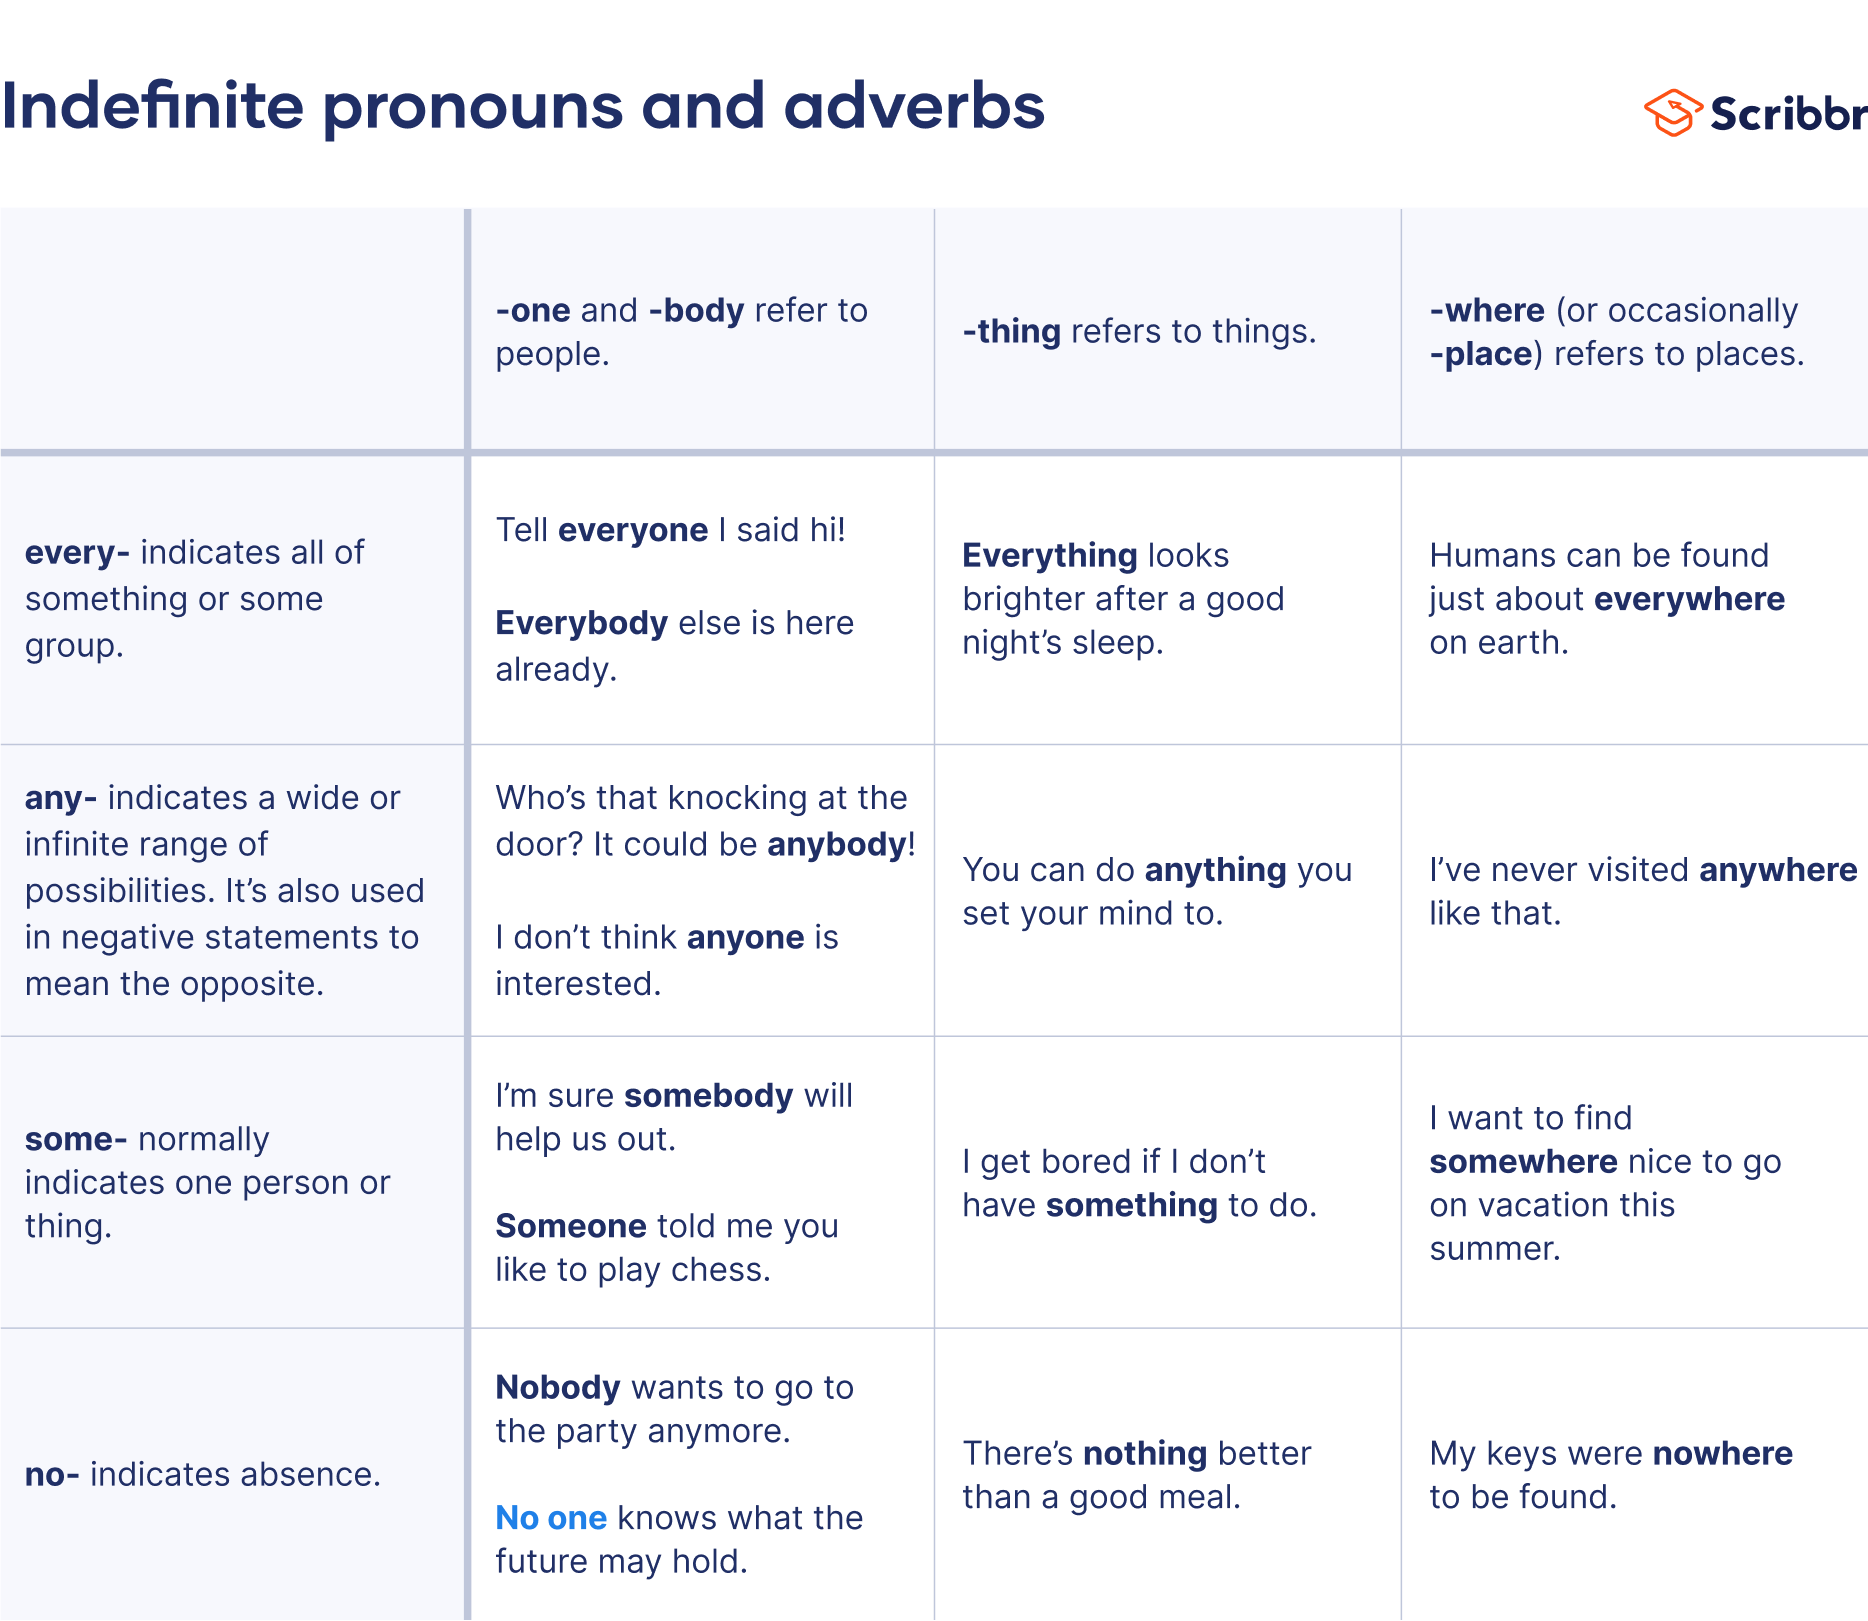 Indefinite pronouns and adverbs